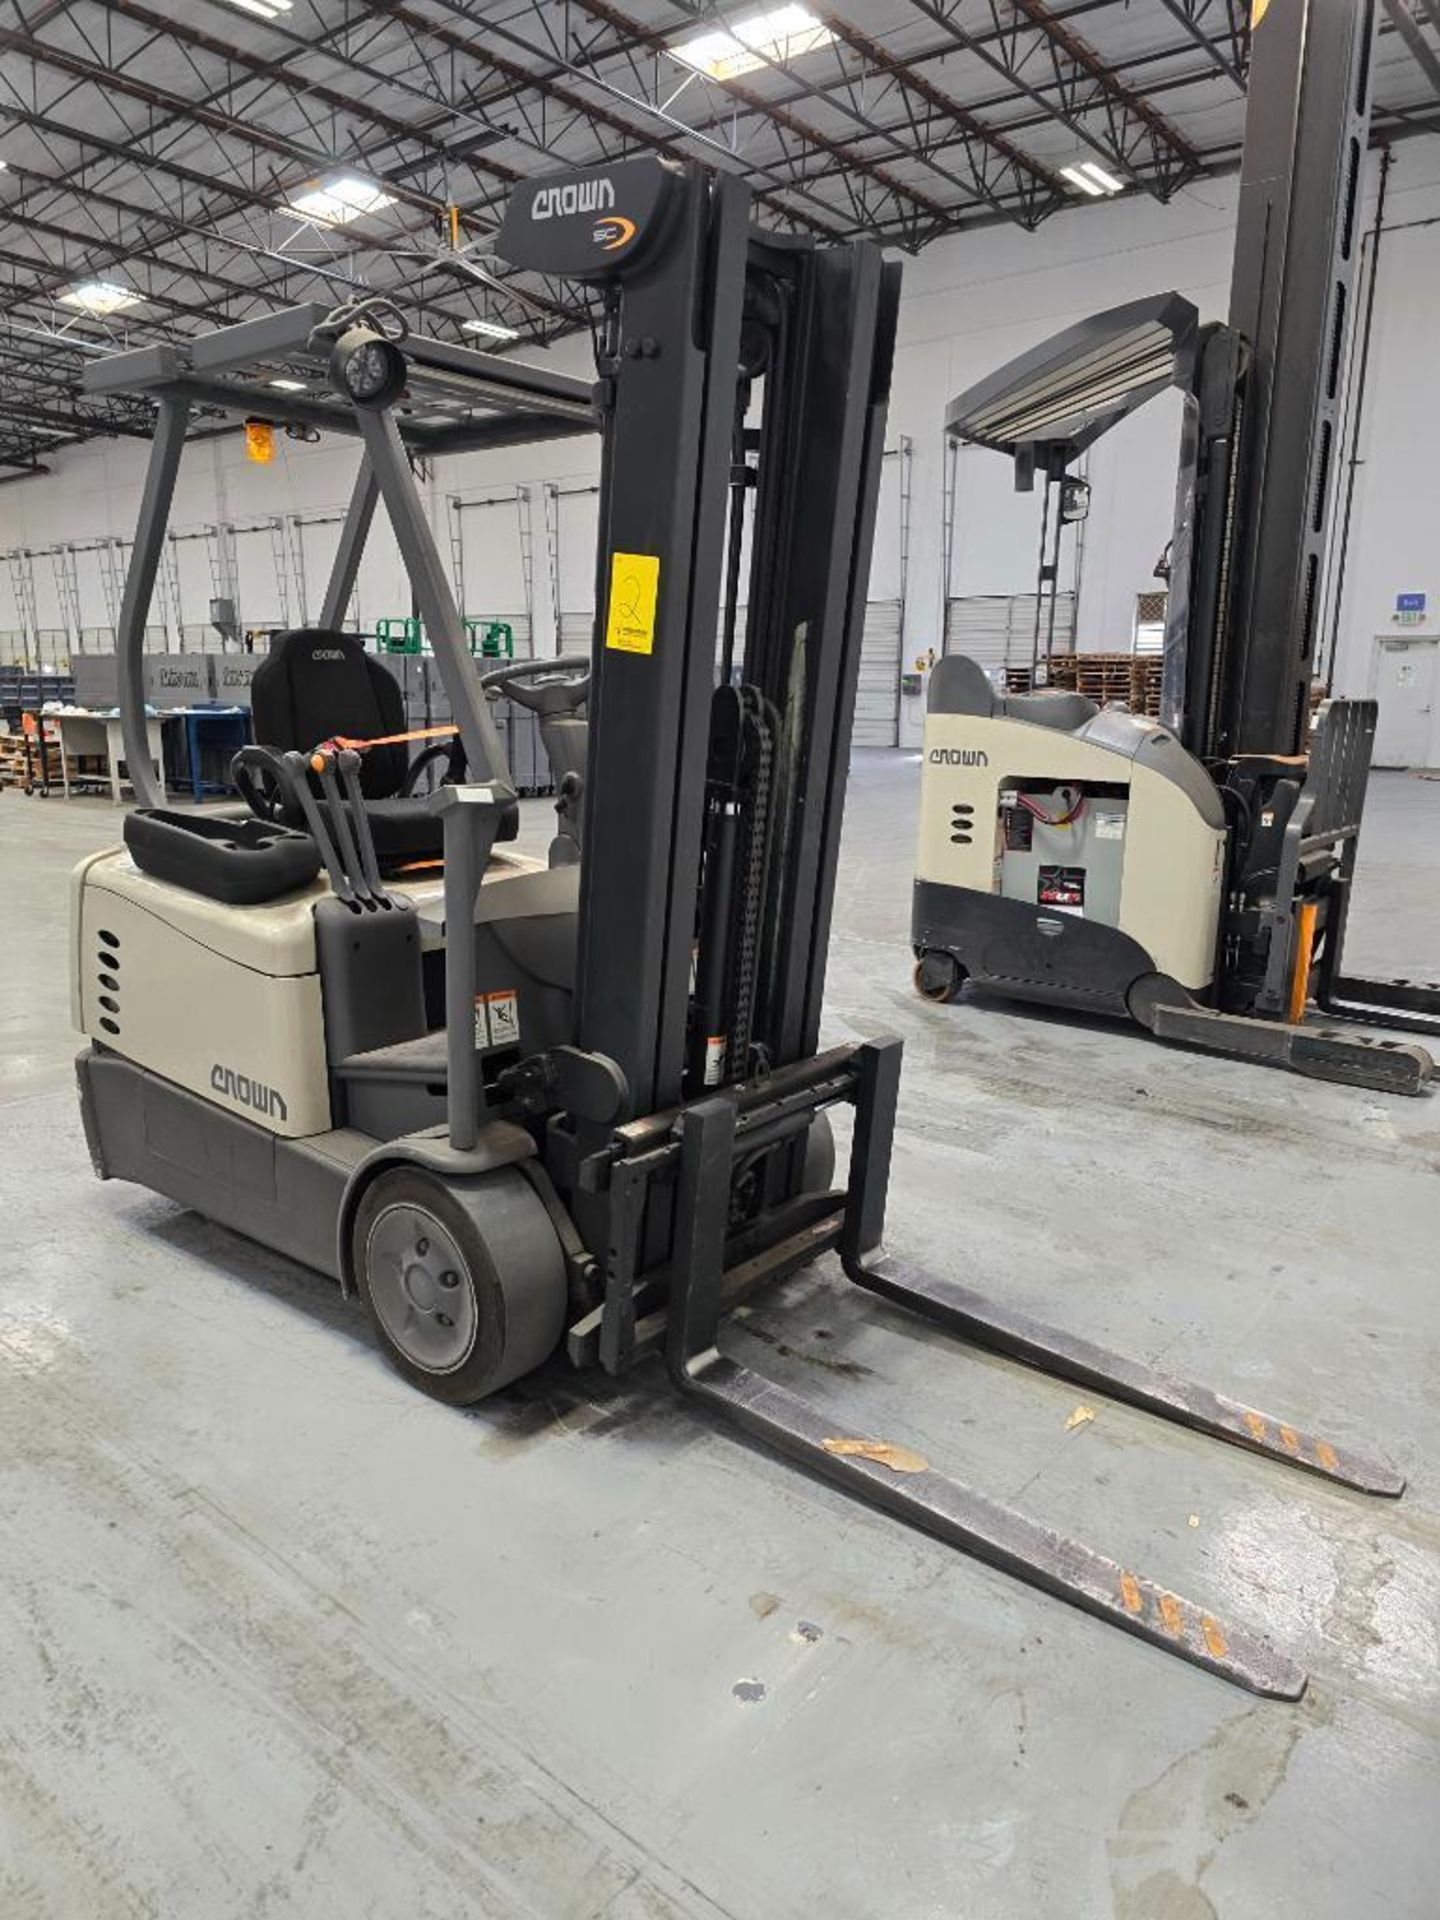 2011 Crown 2,850-LB. Capacity 3-Wheel Electric Forklift, Model: SC 5200 Series, S/N: 9A189853. 190" - Image 3 of 15